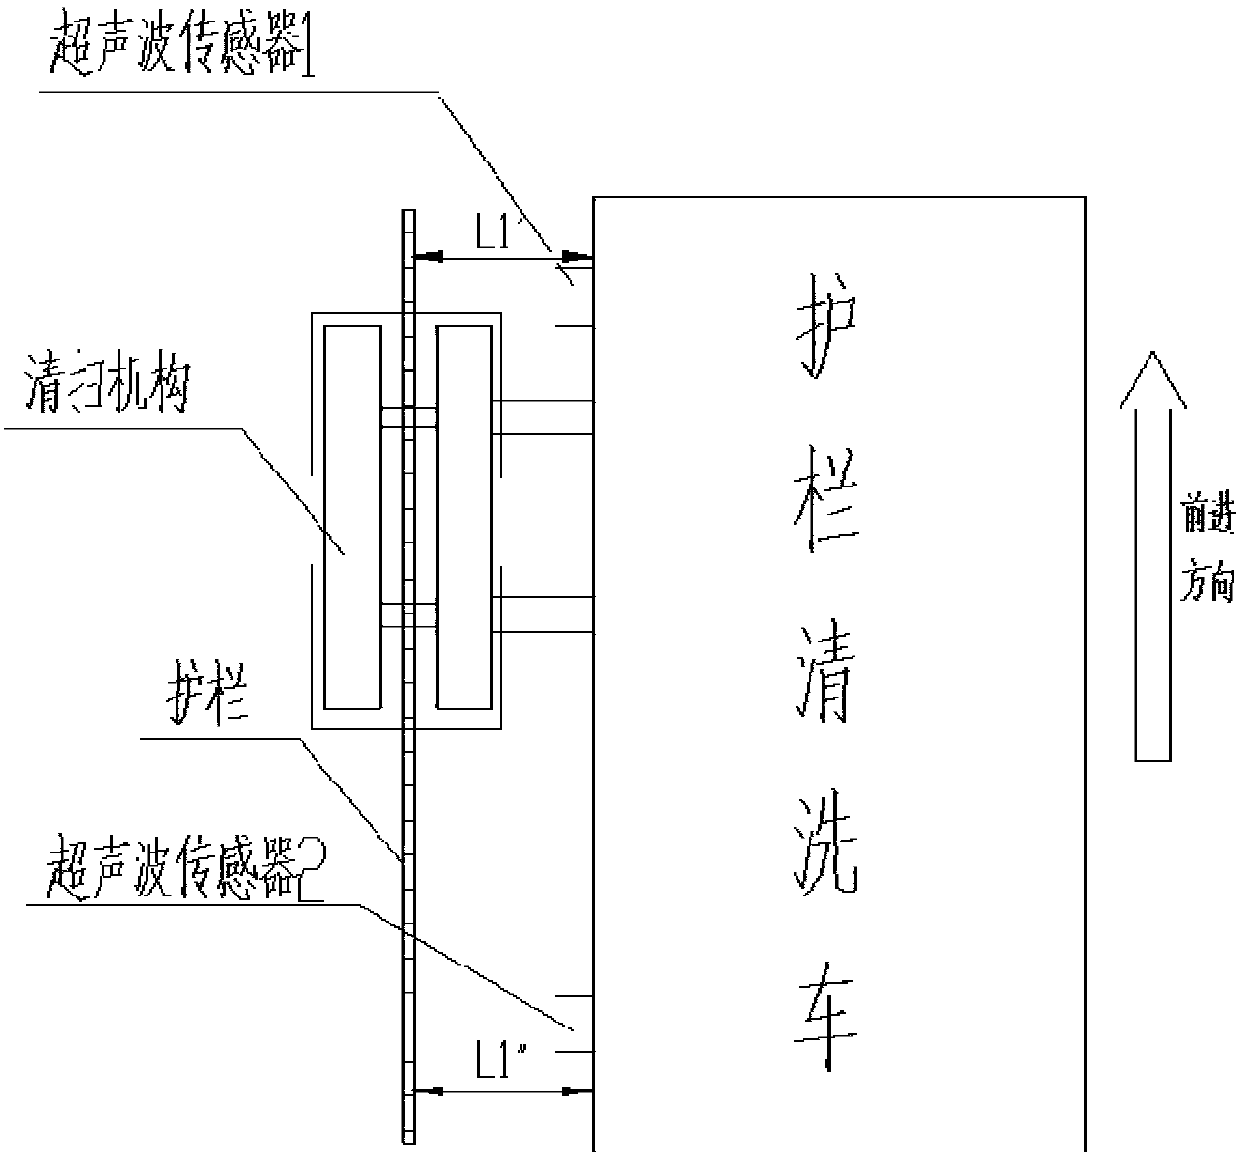 Posture reminding and controlling system for guardrail cleaning vehicle